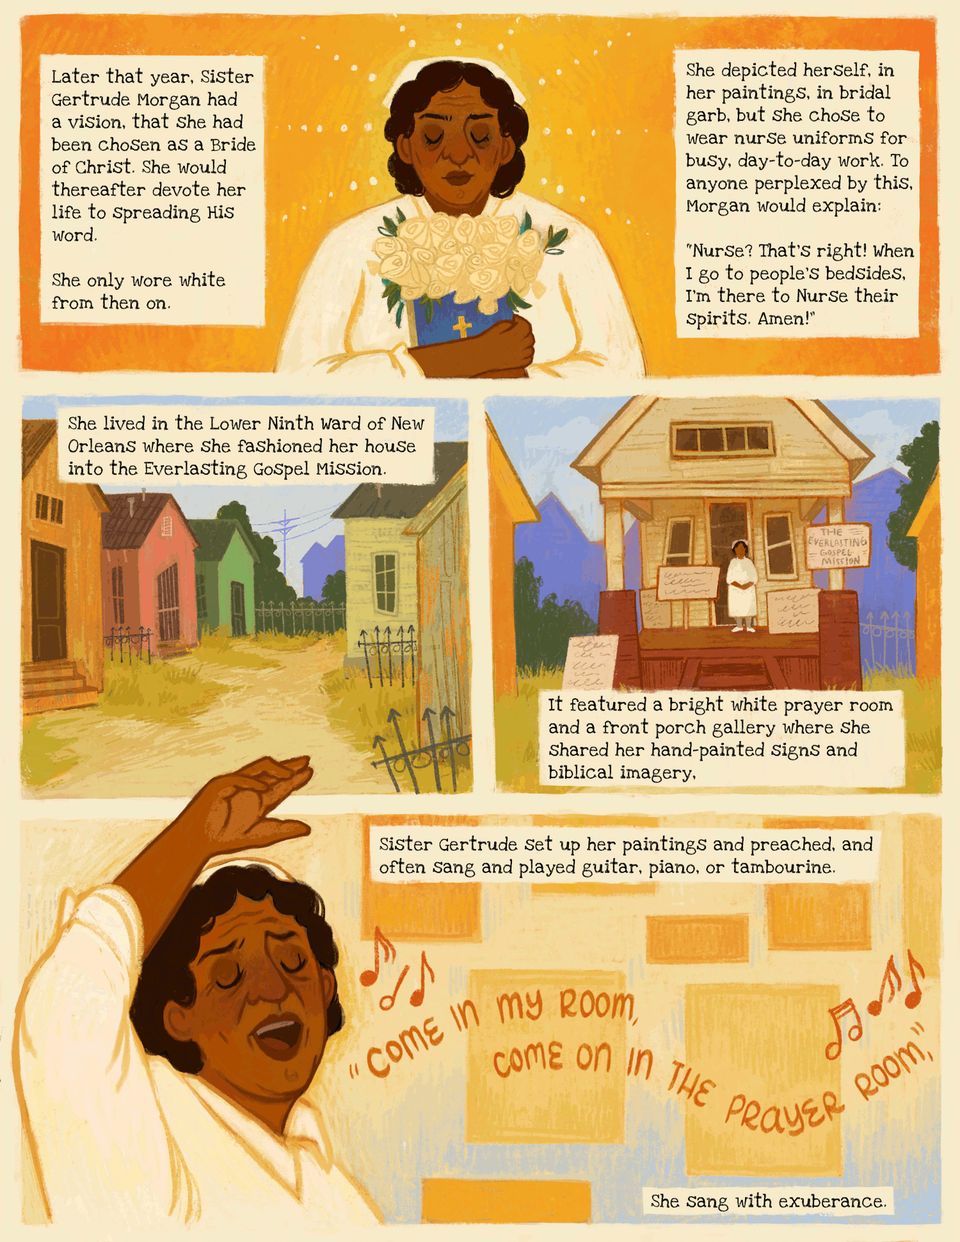 Illustrations and description of Sister Gertrude becoming the "chosen Bride of Christ" and turning her house in New Orleans into the Everlasting Gospel Mission.